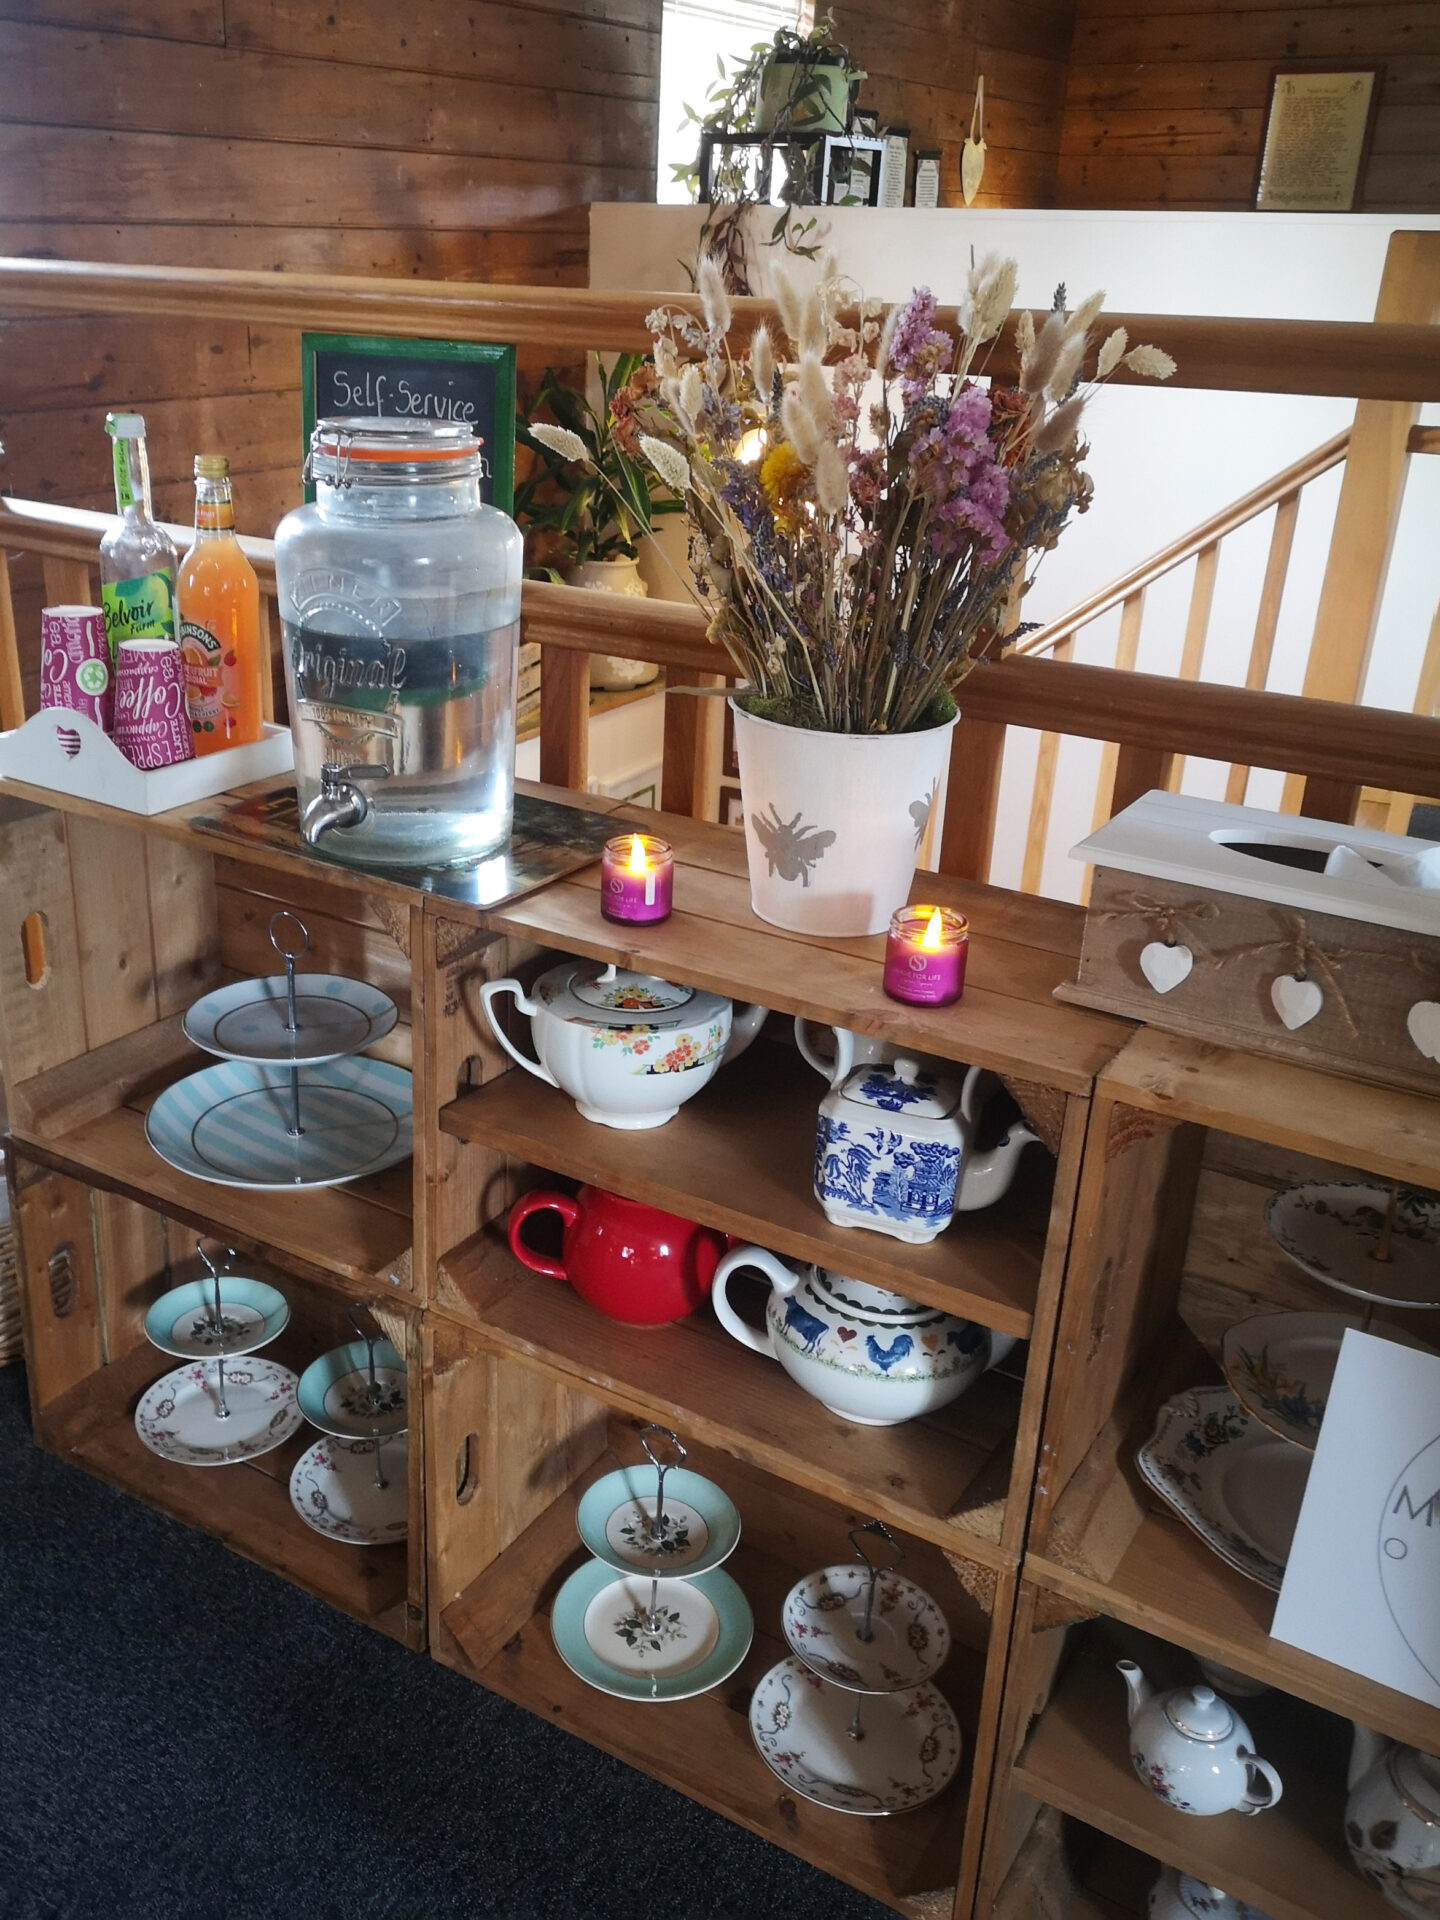 The Granary Spa, Pure Bliss Treatment, Spa Day, Spa Review, Kent Business, Rural Retreat, Things to Do in Kent, Kent, Massage, Holistic Beauty, Beauty Spa, the Frenchie Mummy